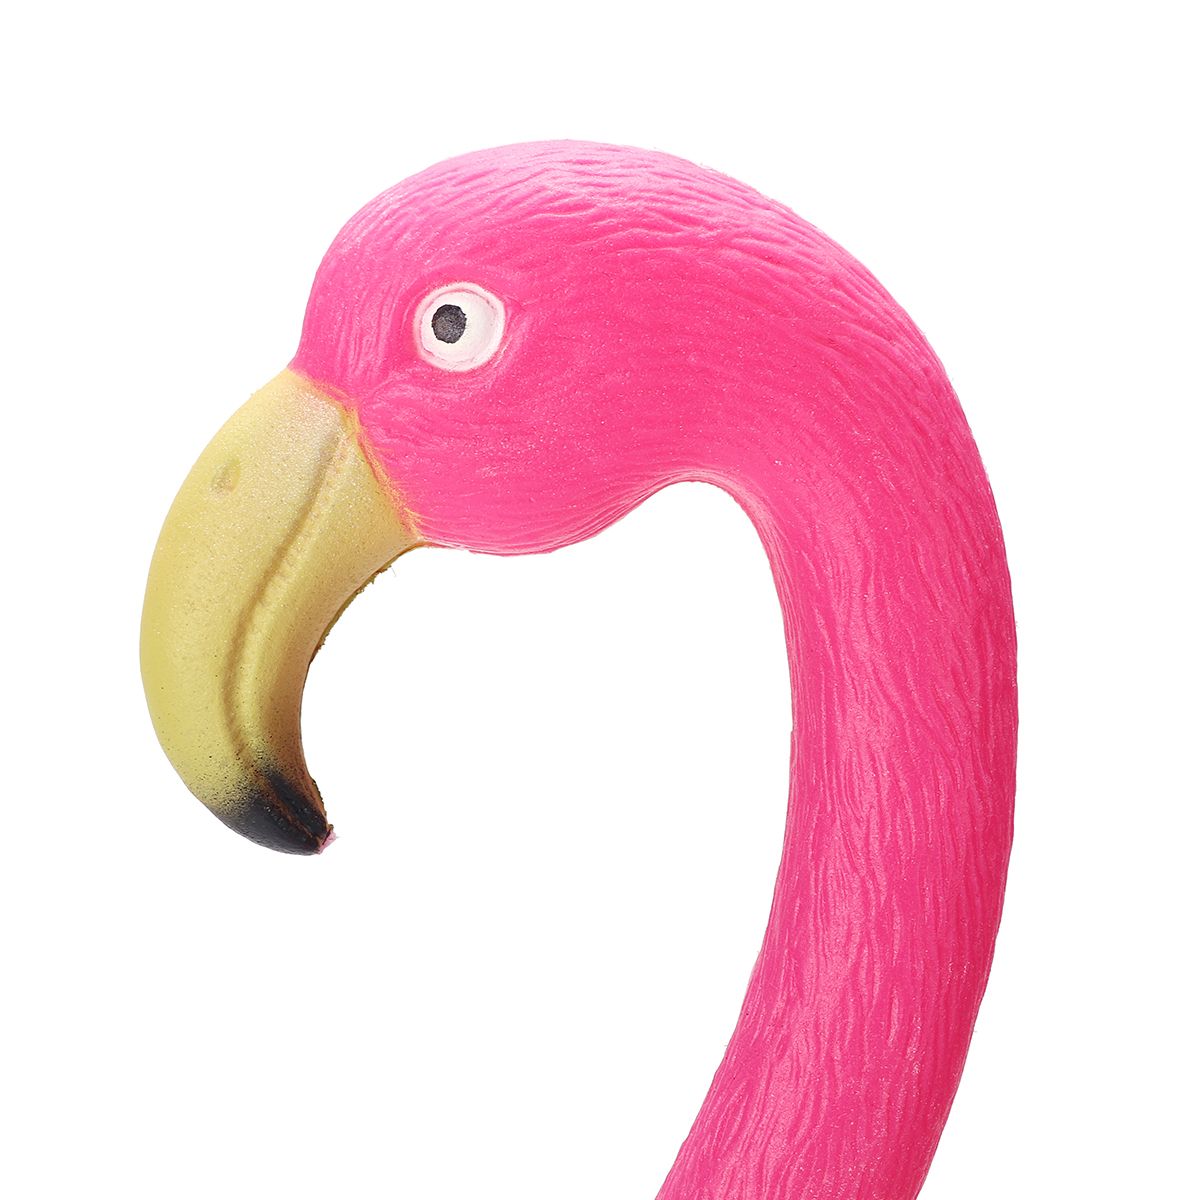 31x105x40cm-DIY-Pink-Flamingo-Garden-Decorations-Animal-Model-Without-Wings-1445350